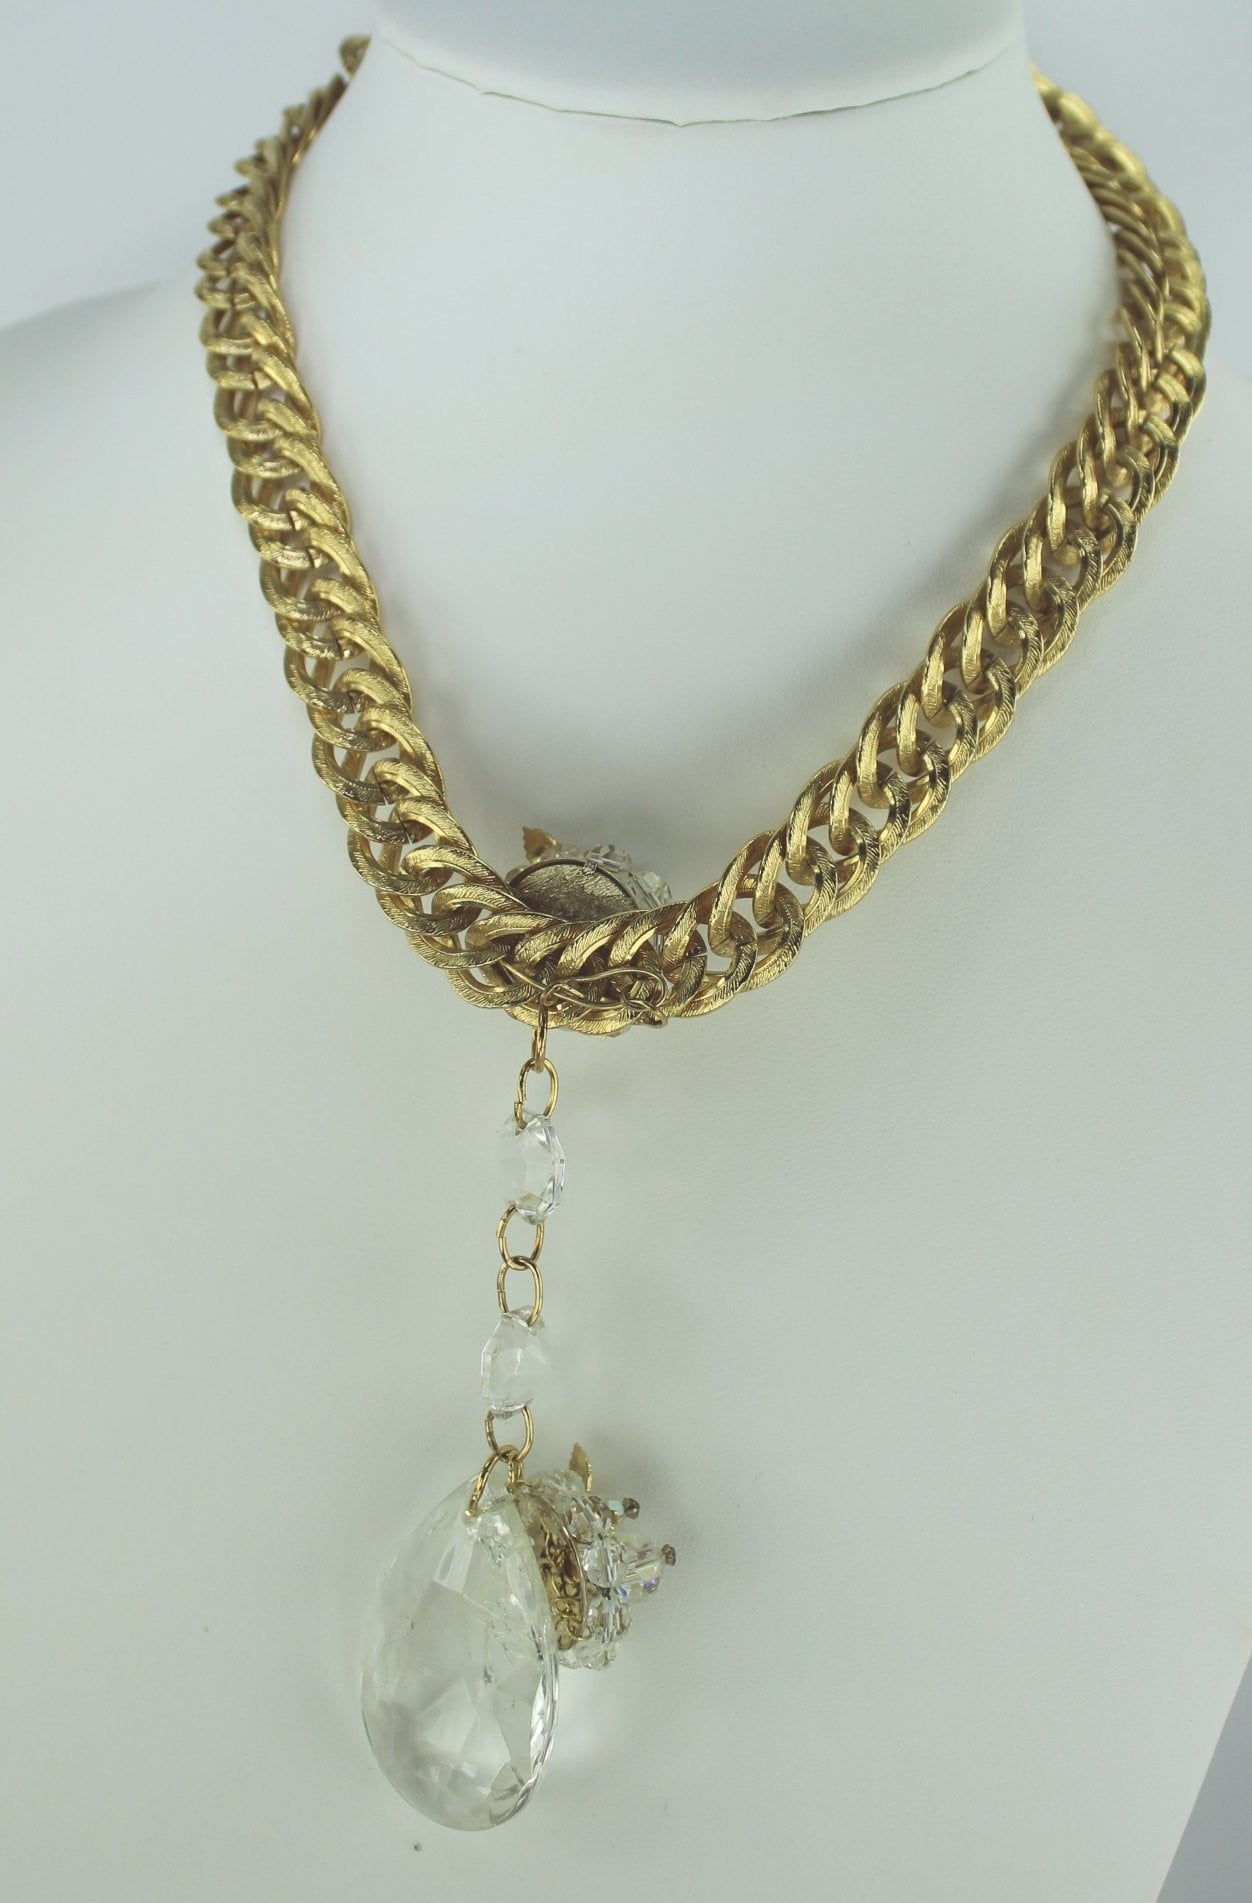 Vintage New Prism Necklace Patzi Re-Design RS Heavy Gold Tone Chain runway